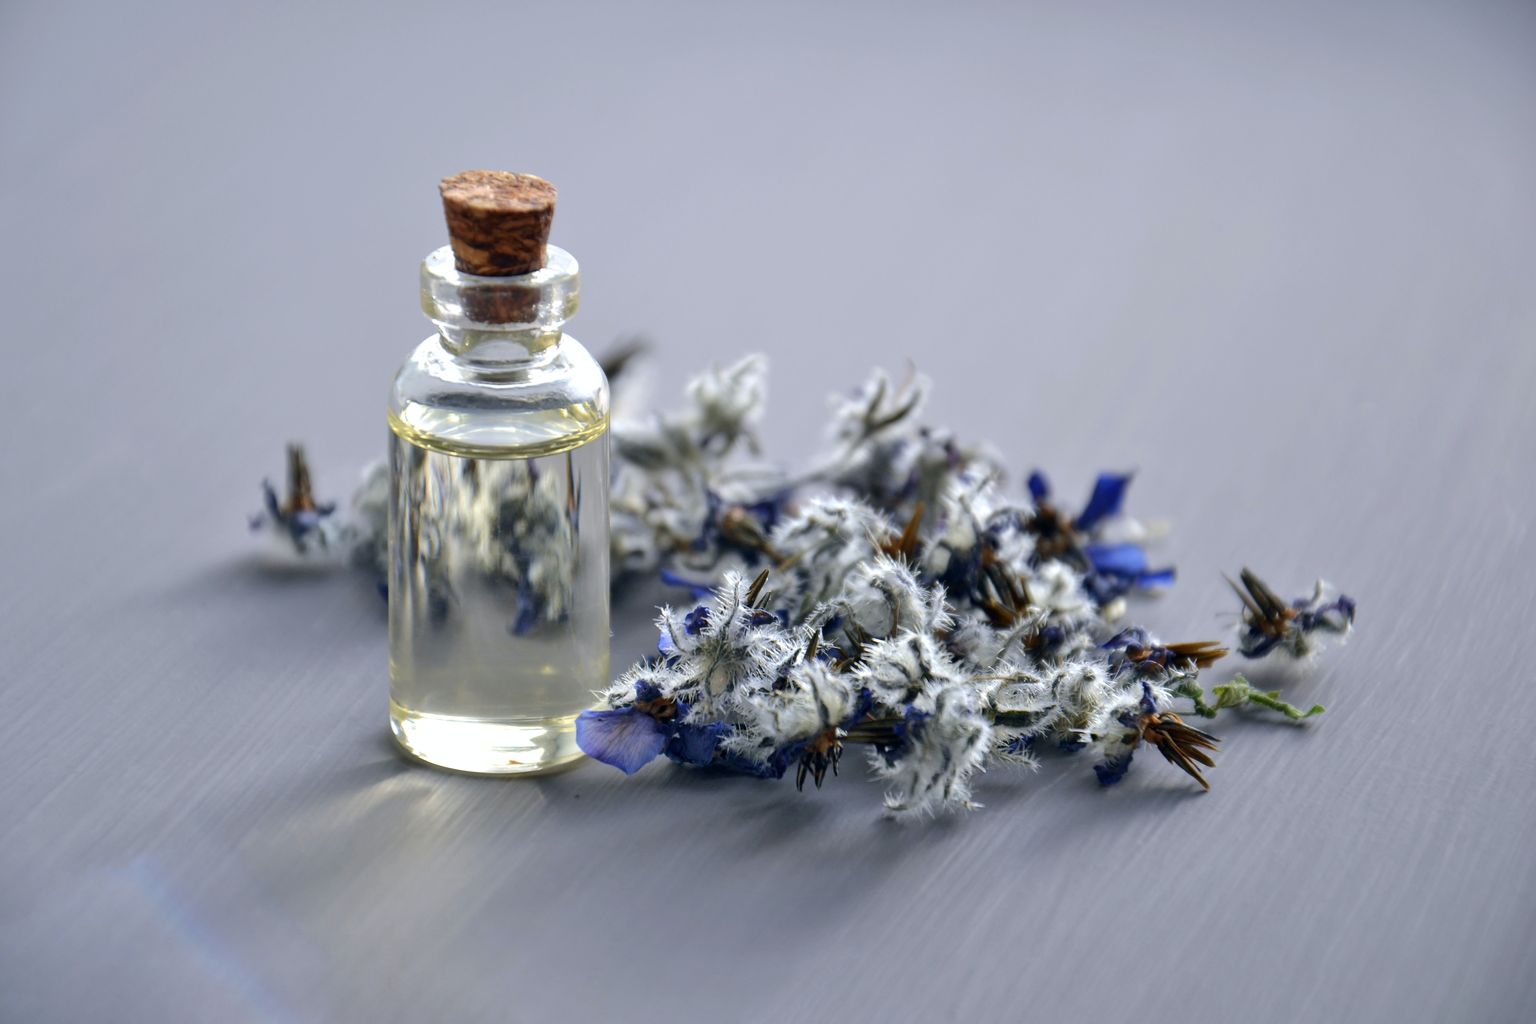 Flowers with small glass bottle. Inside is an aromatic oil.